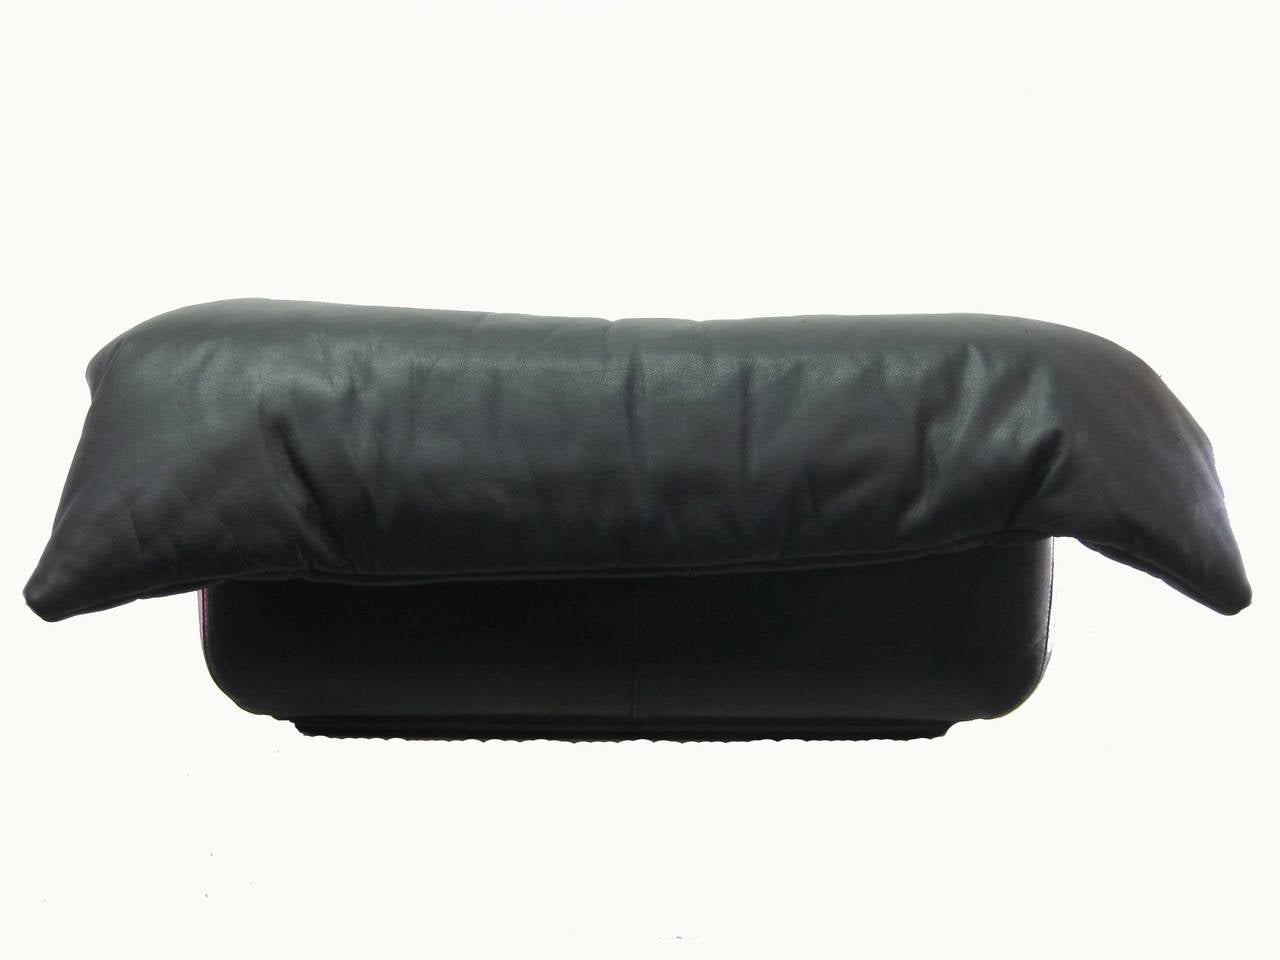 Black leather ottoman made by Ligne Roset.